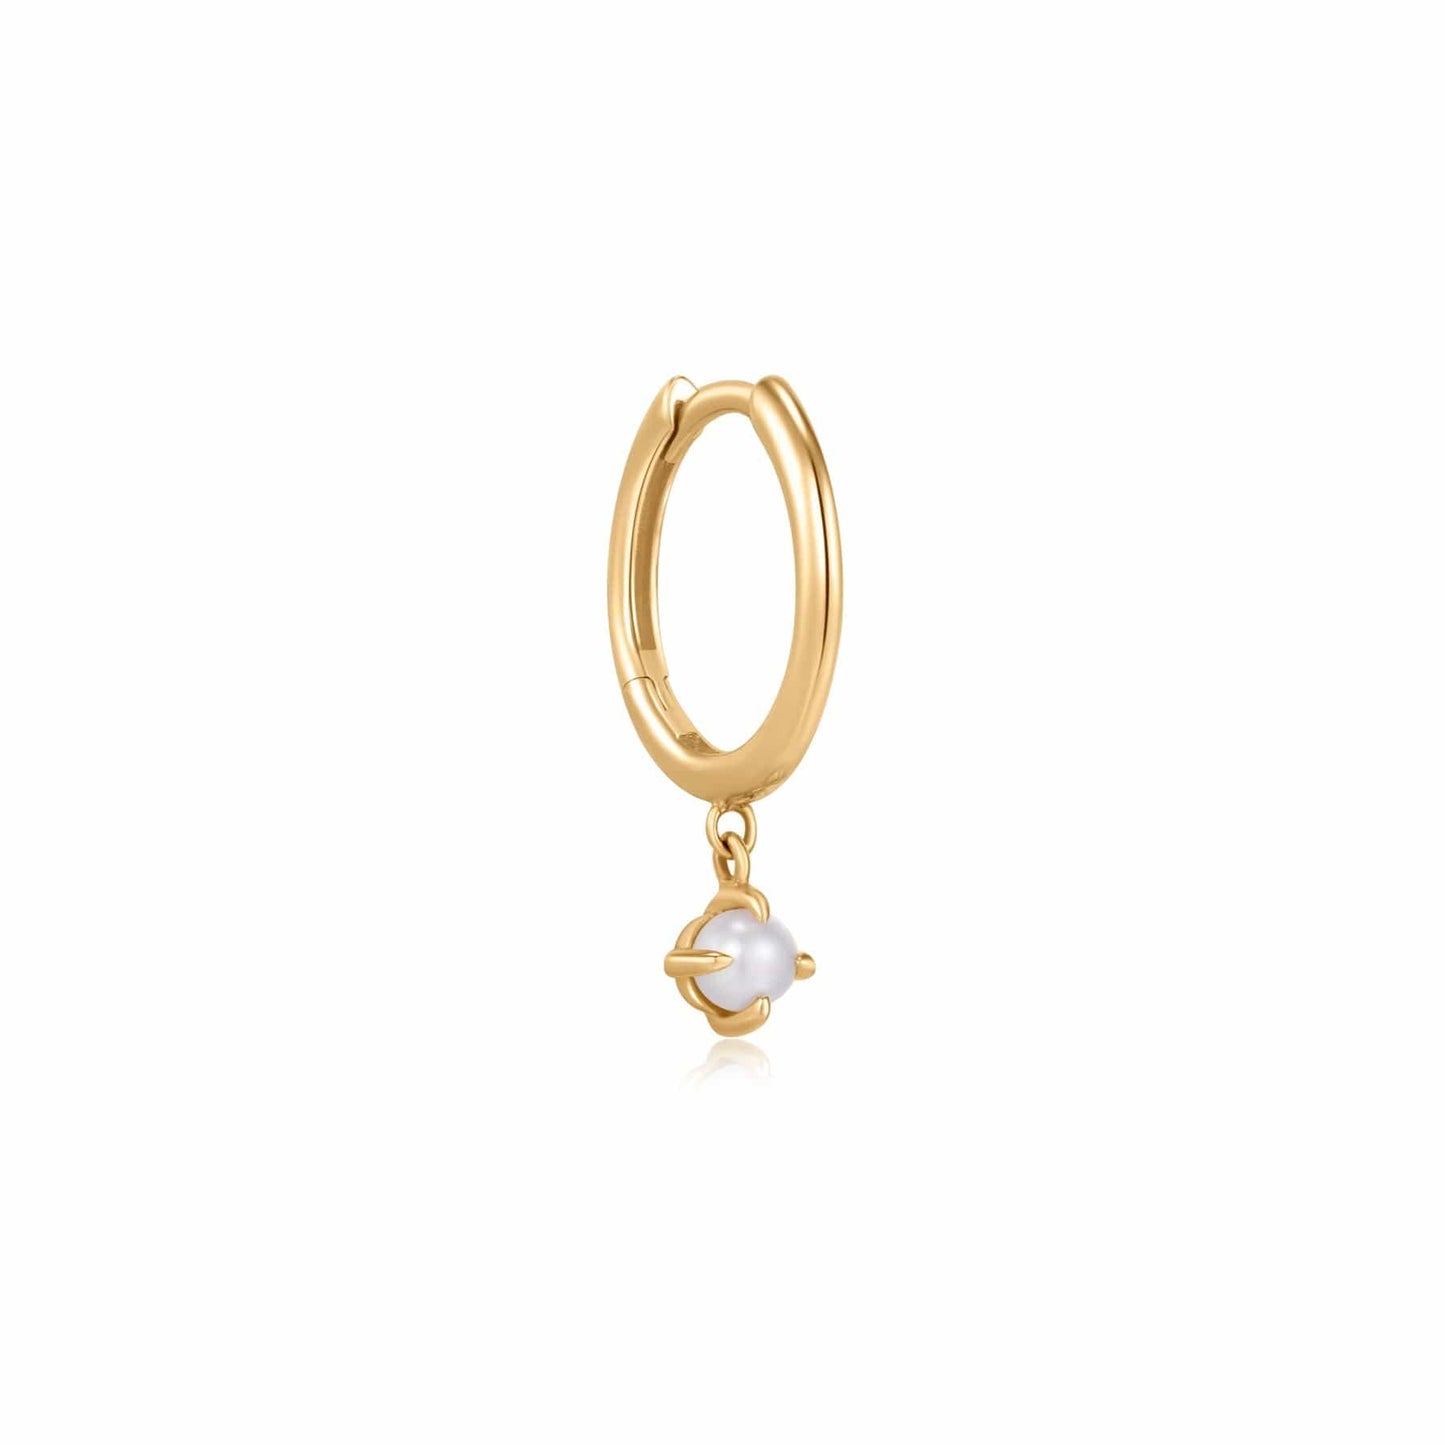 EAR-14K Clicker Hoop with White Pearl Dangle - SOLD AS A SINGLE